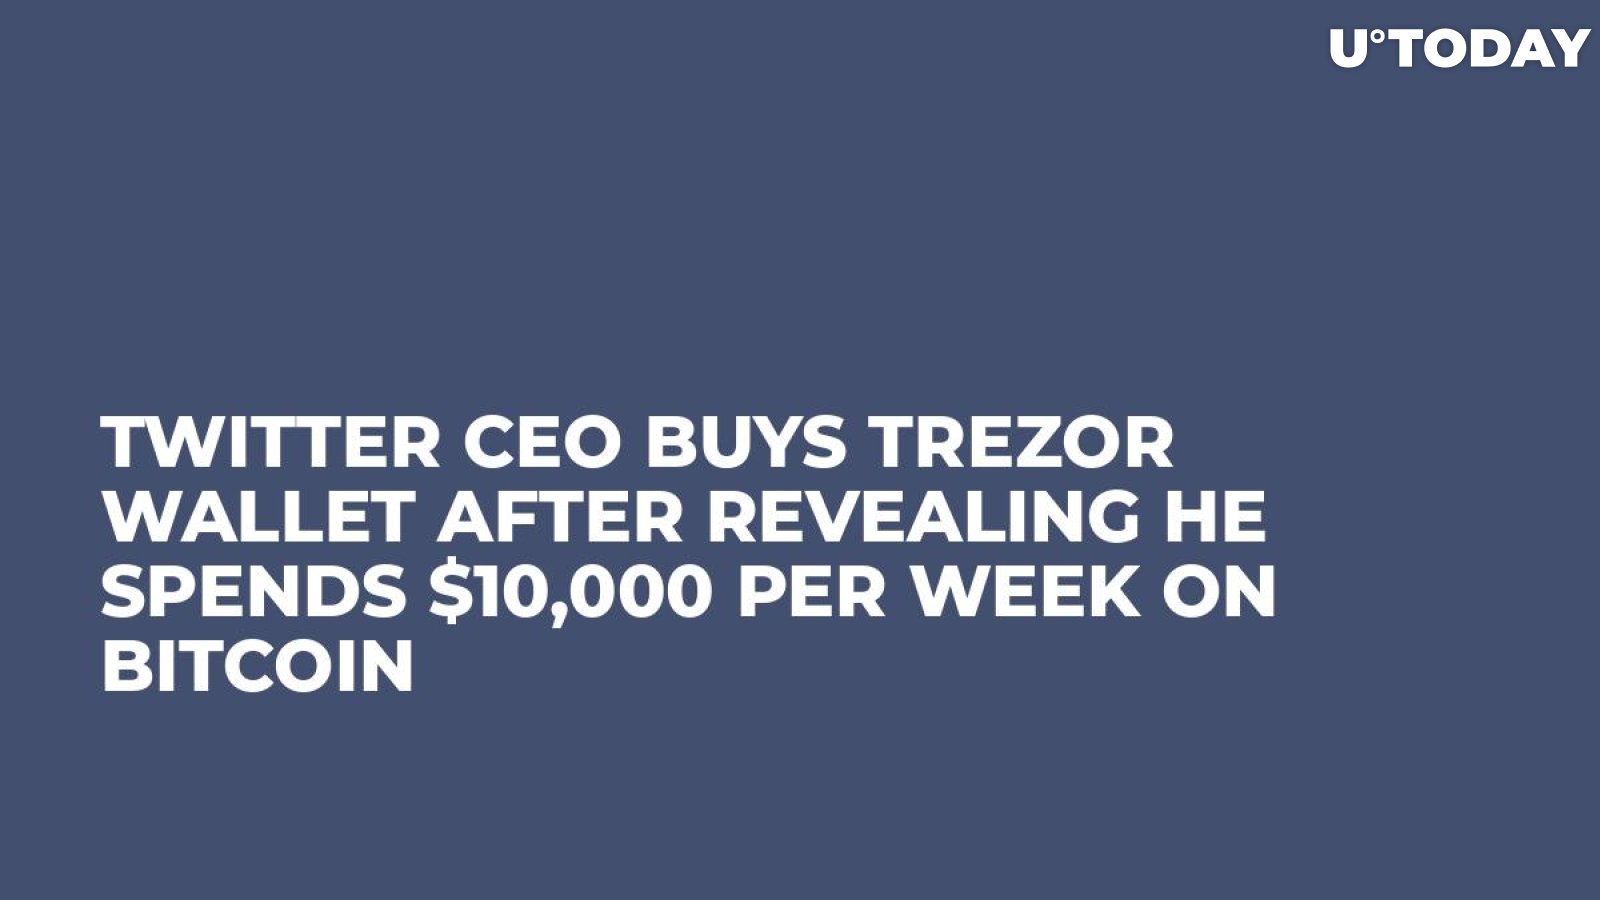 Twitter CEO Buys Trezor Wallet After Revealing He Spends $10,000 Per Week on Bitcoin